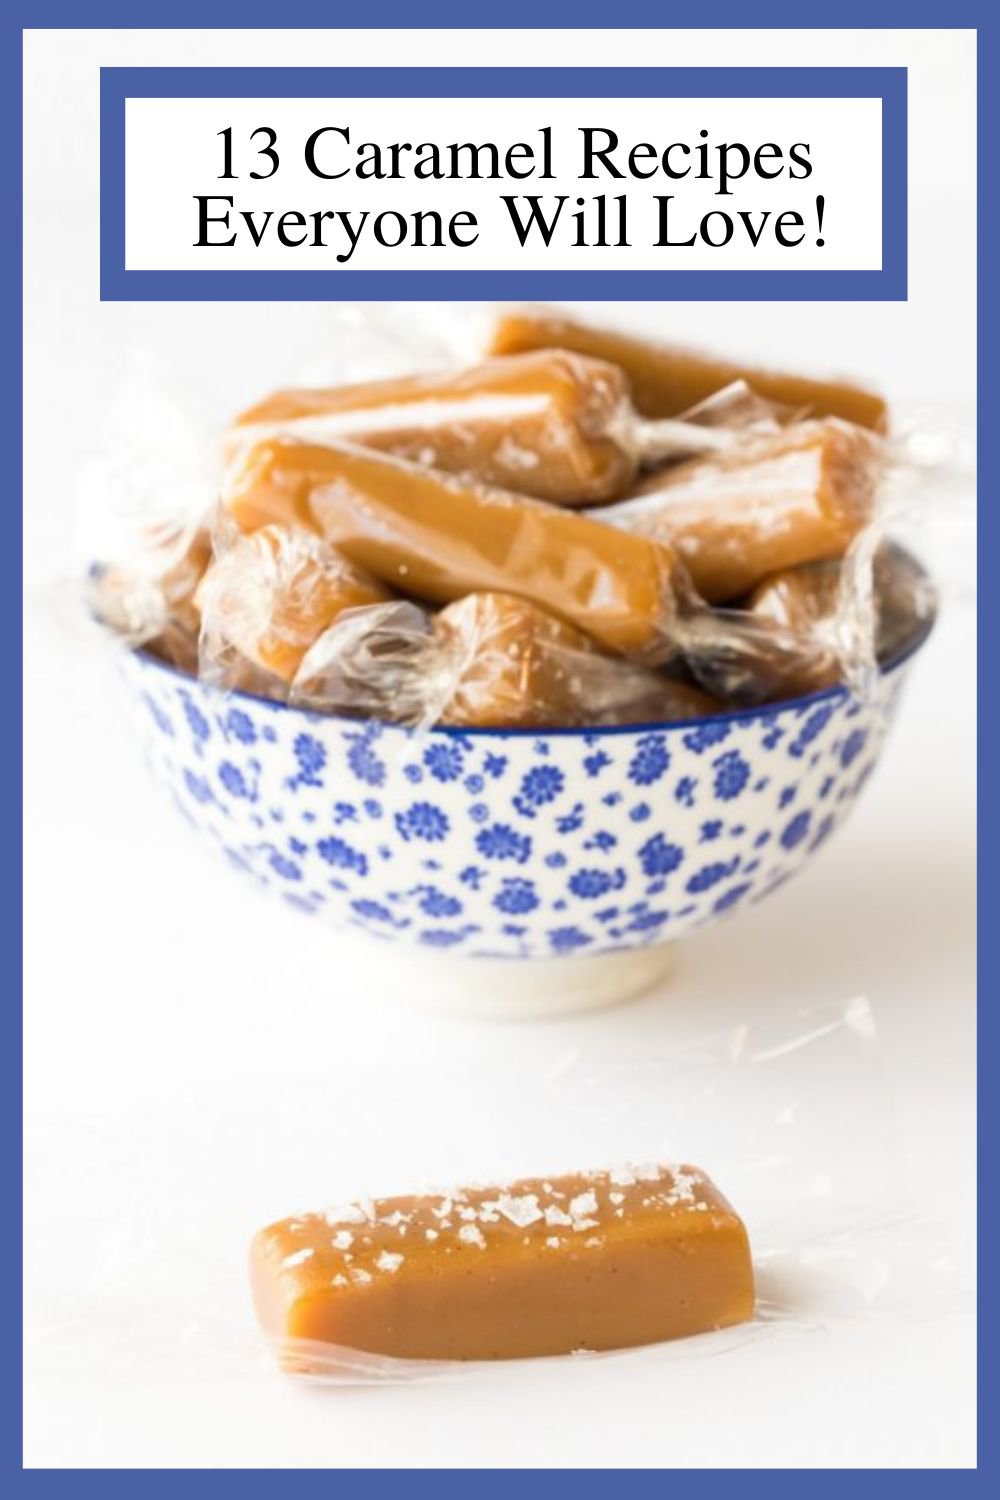 Caramel, A Universal Favorite - 13 Delicious Recipes, Sweet and Savory!